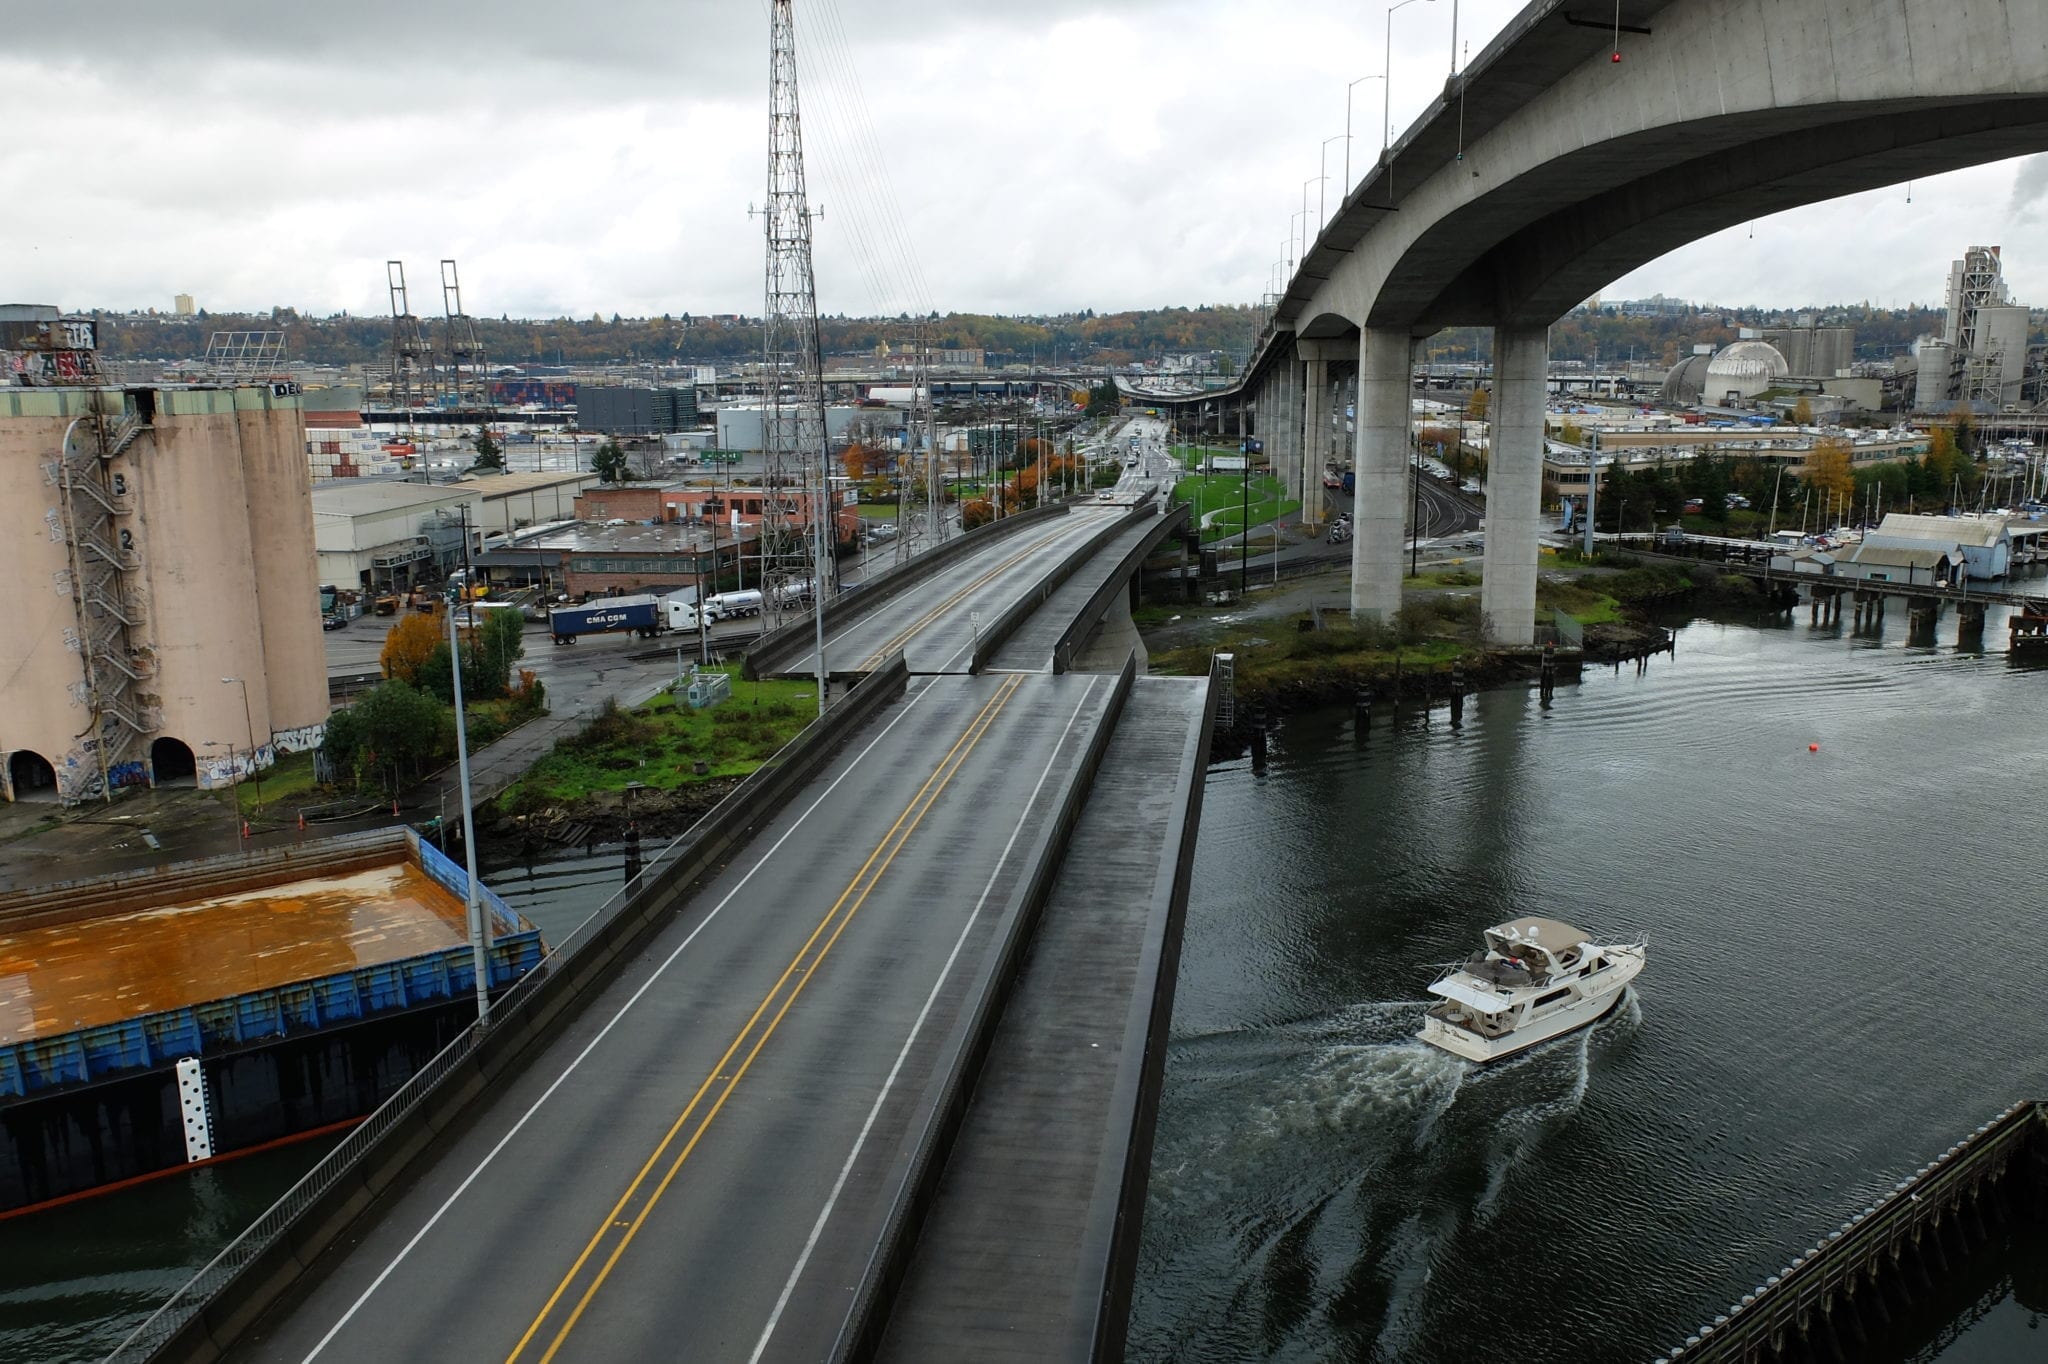 An image of the West Seattle low bridge.